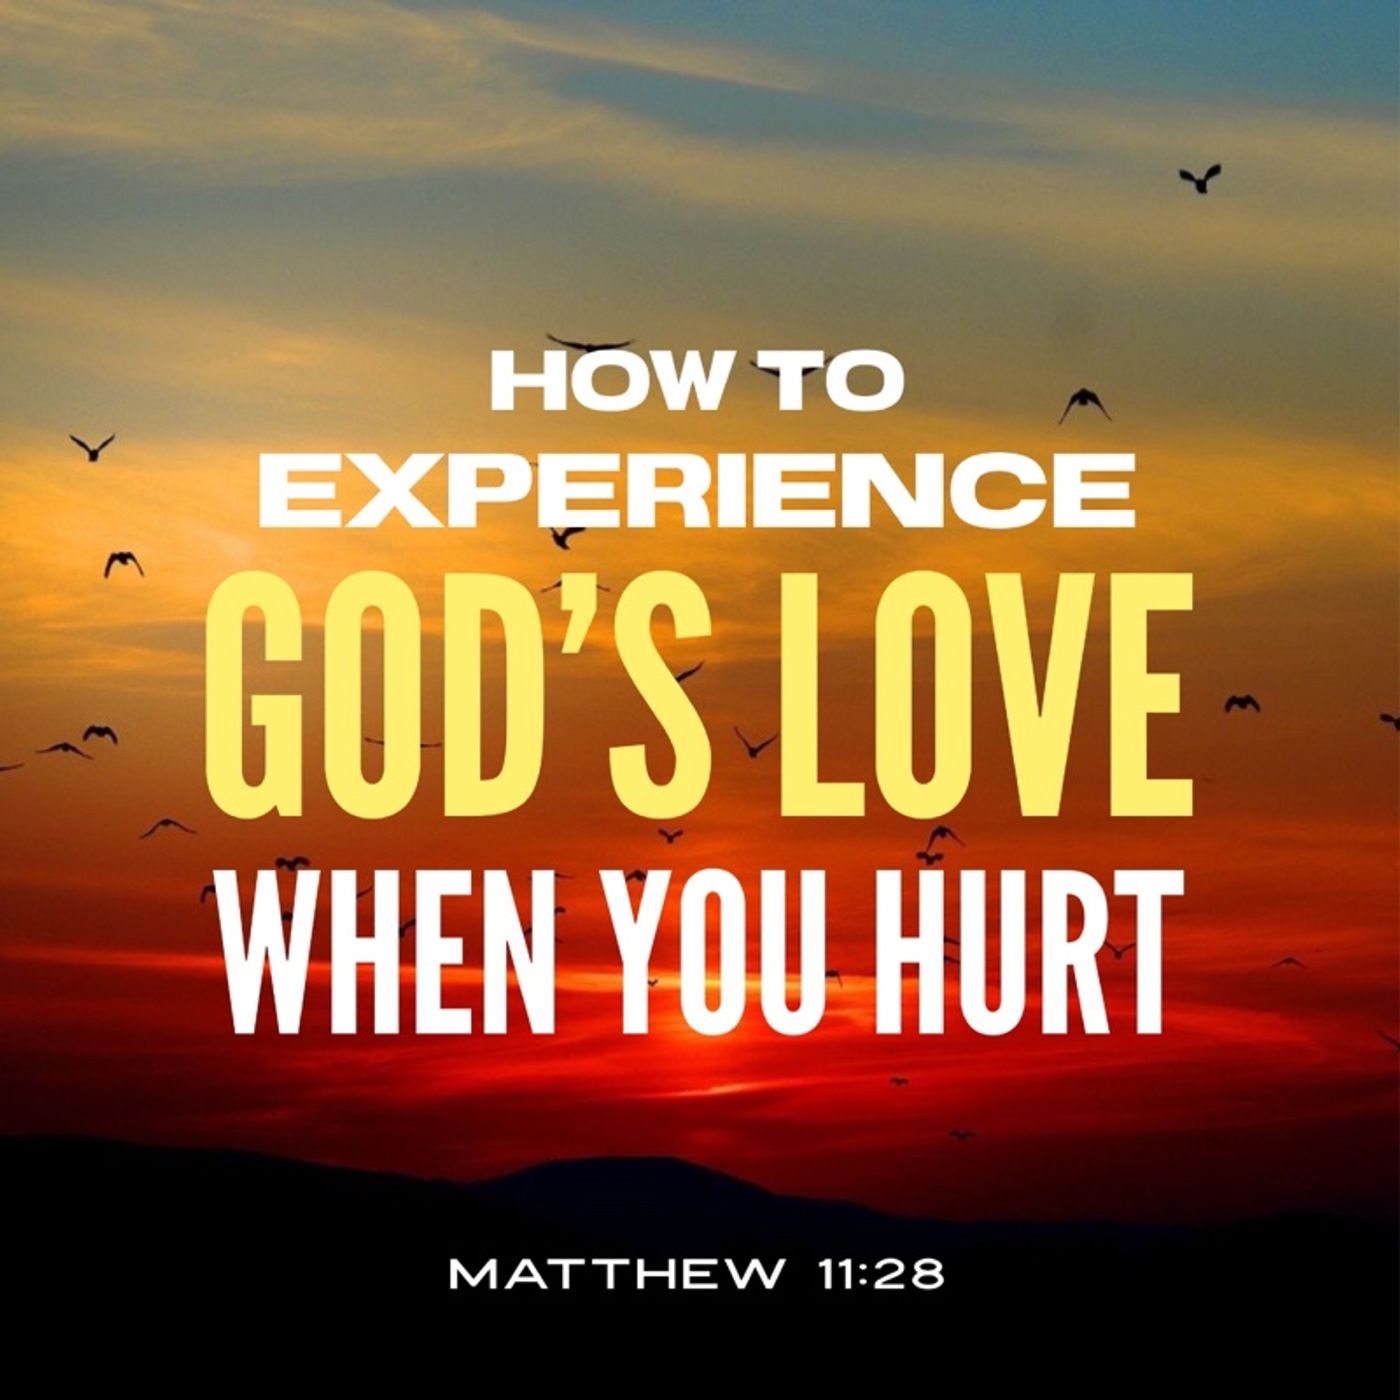 Prayer to Experience God's Love in Your Heartache and Weaknesses